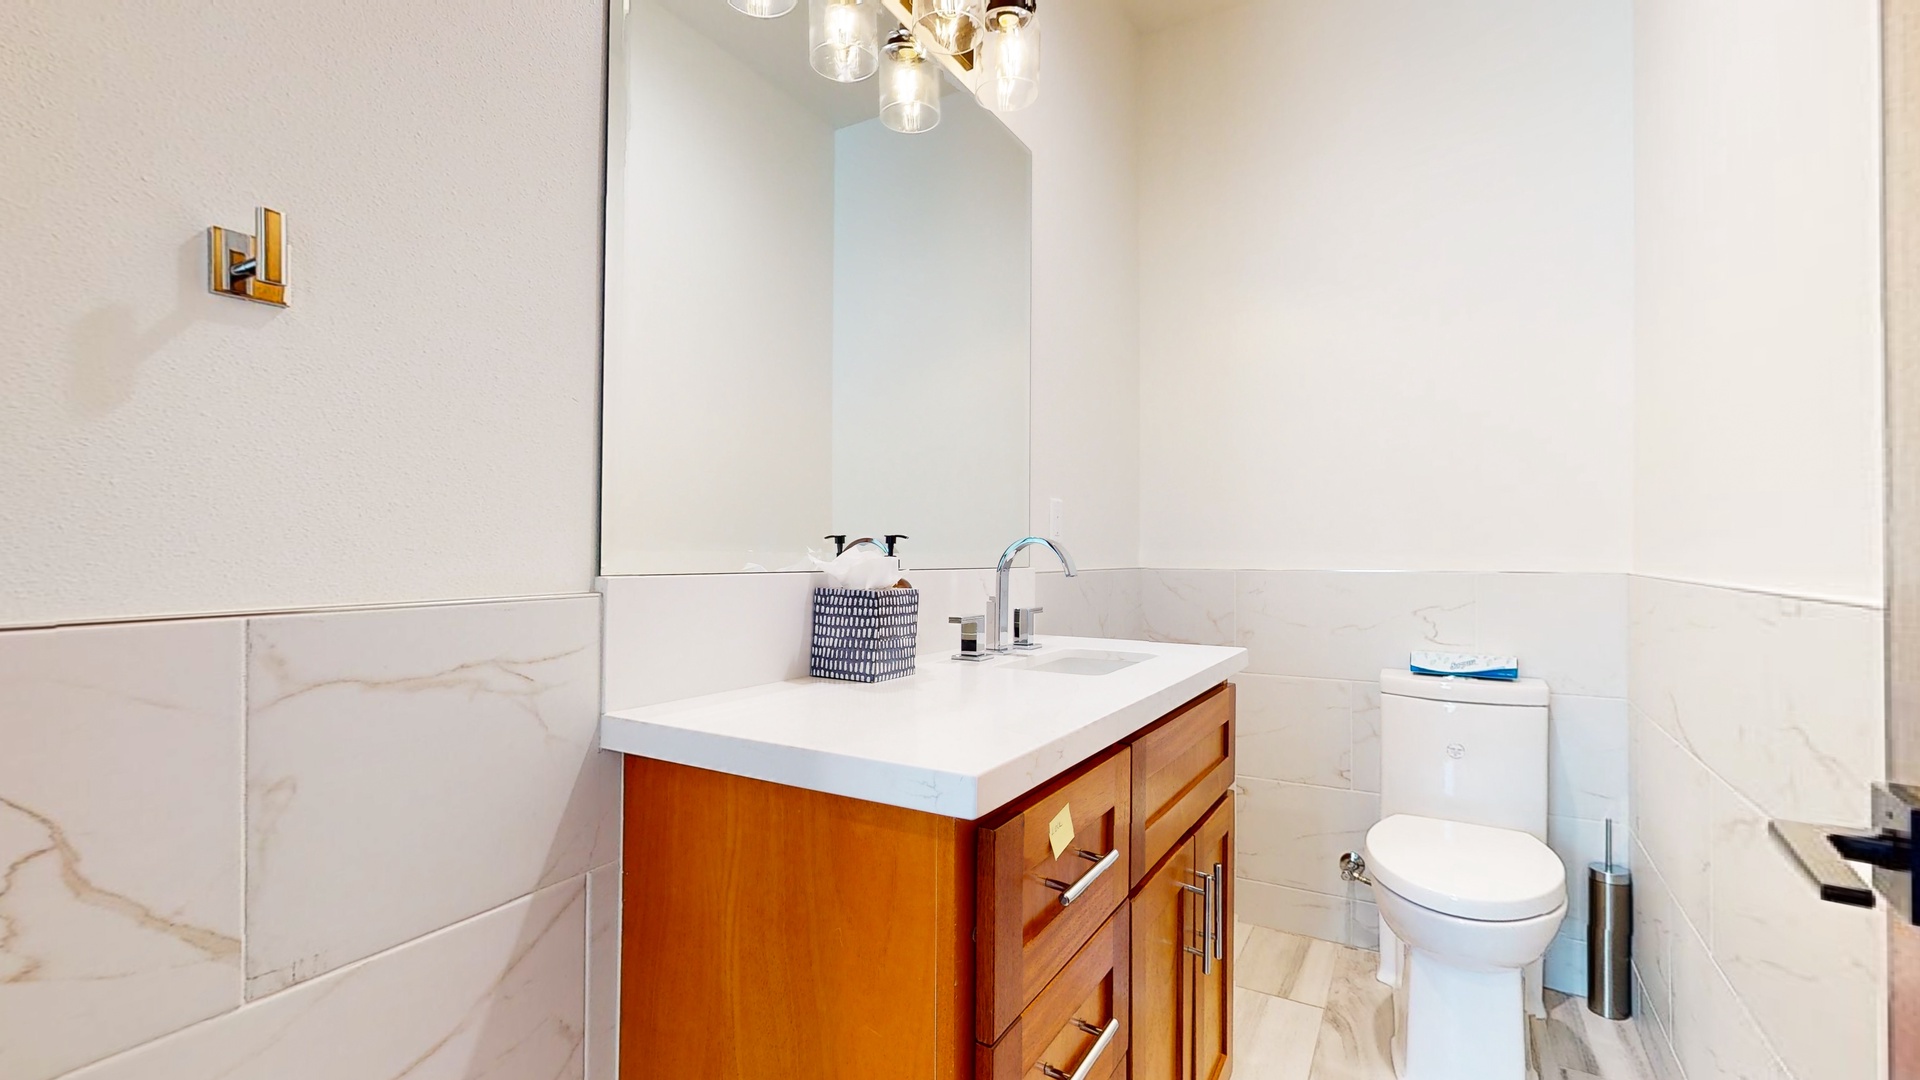 The 2nd floor offers a convenient half bath, located behind the kitchen